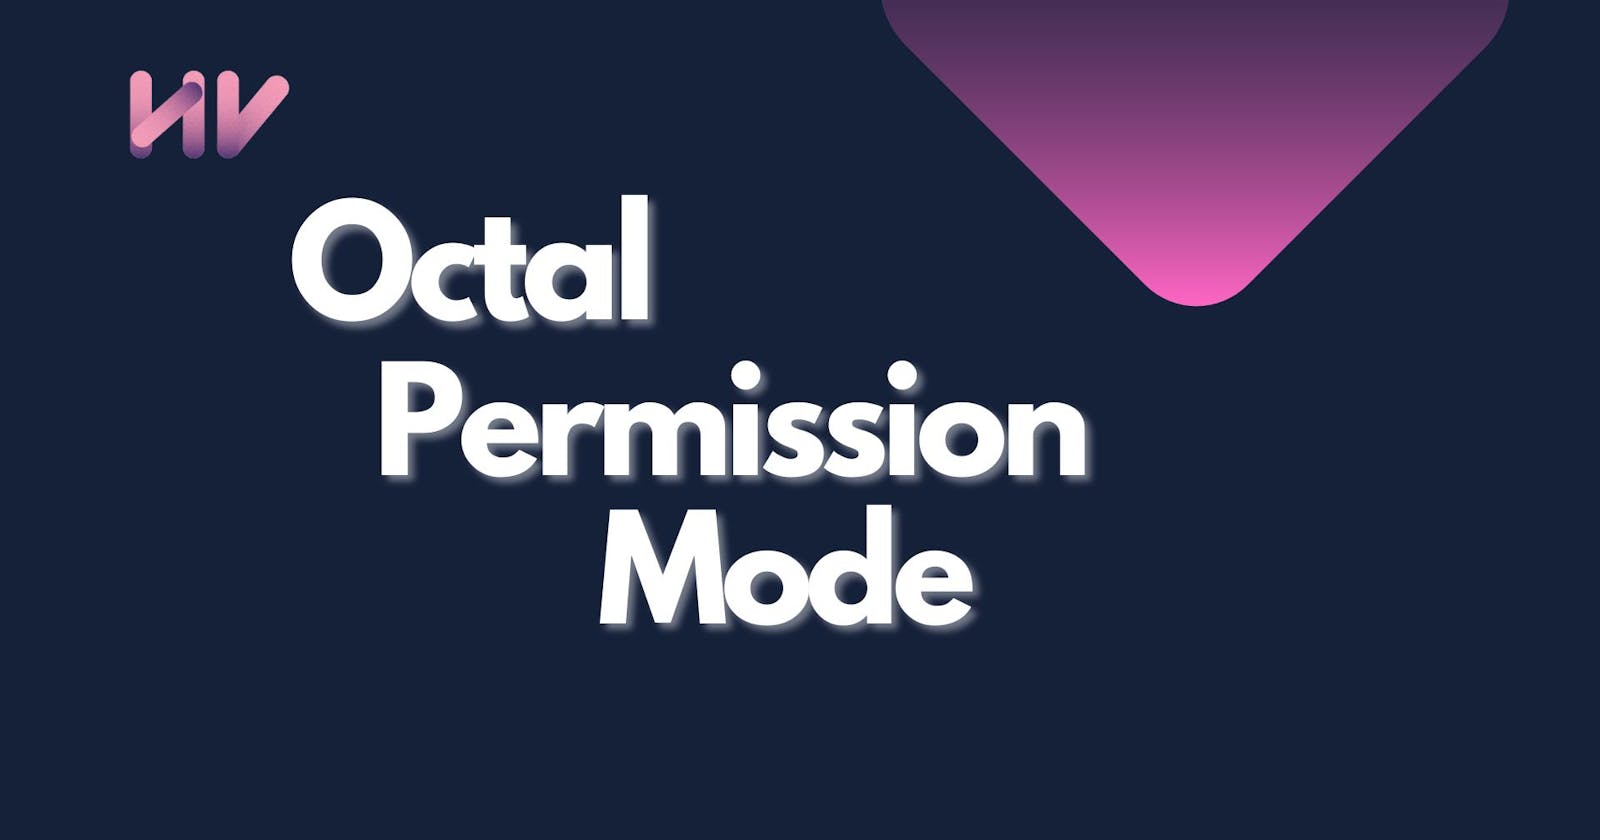 Octal Permission in Linux